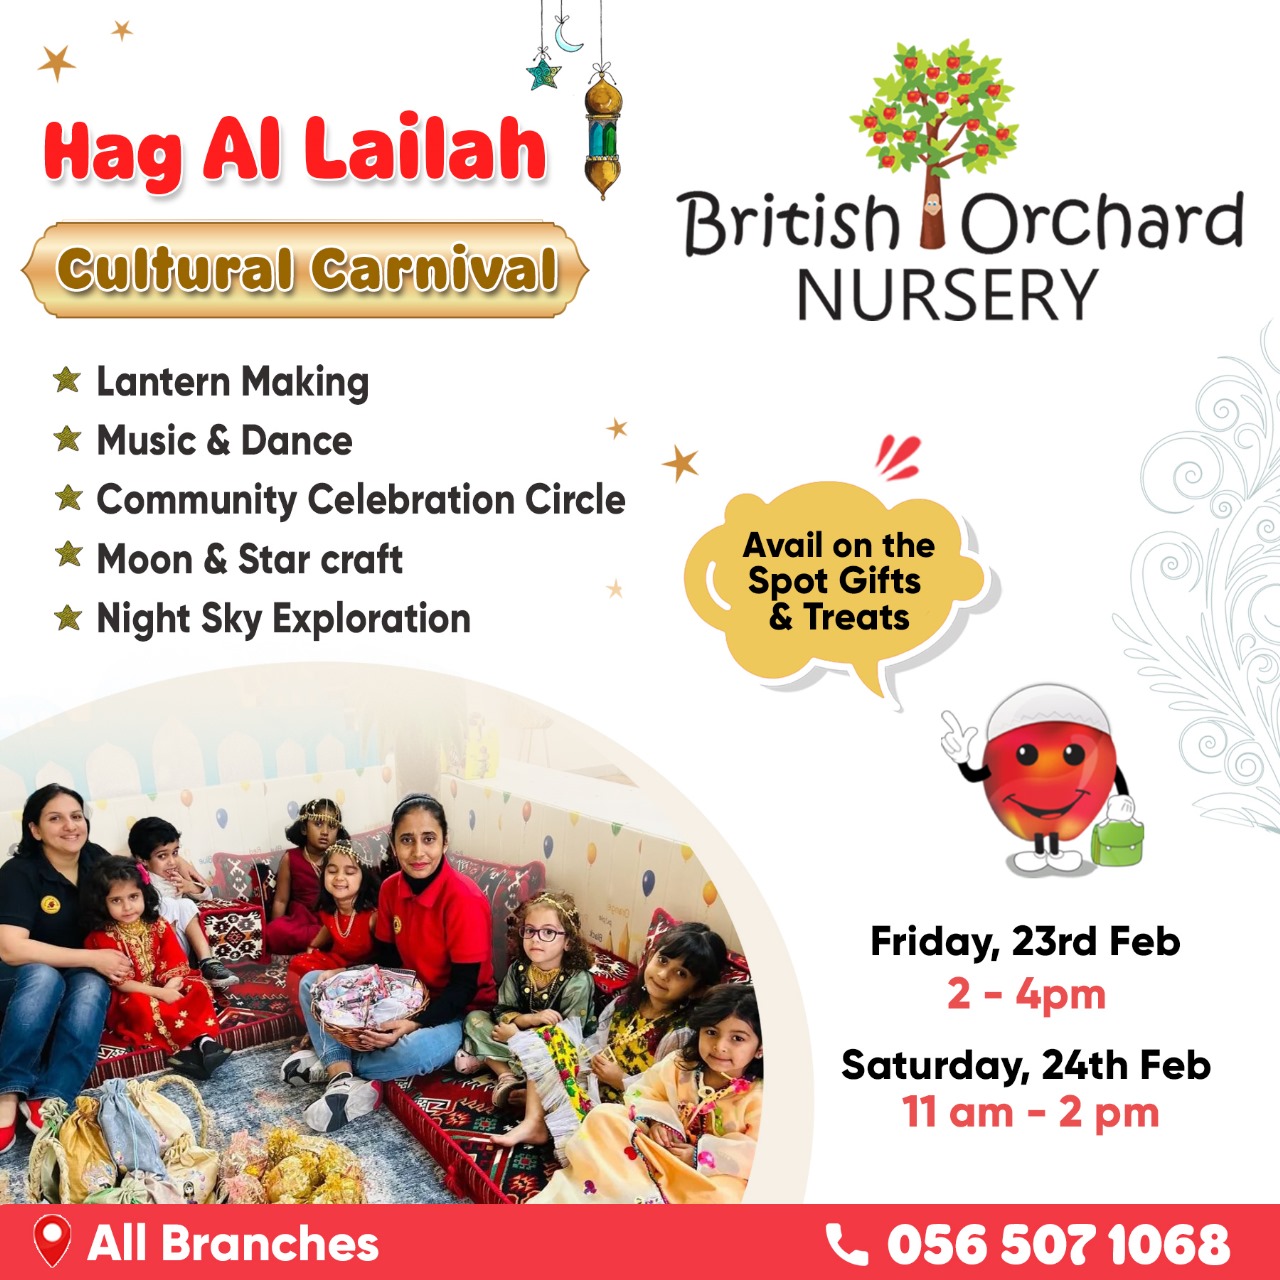 Join us for a Cultural Carnival